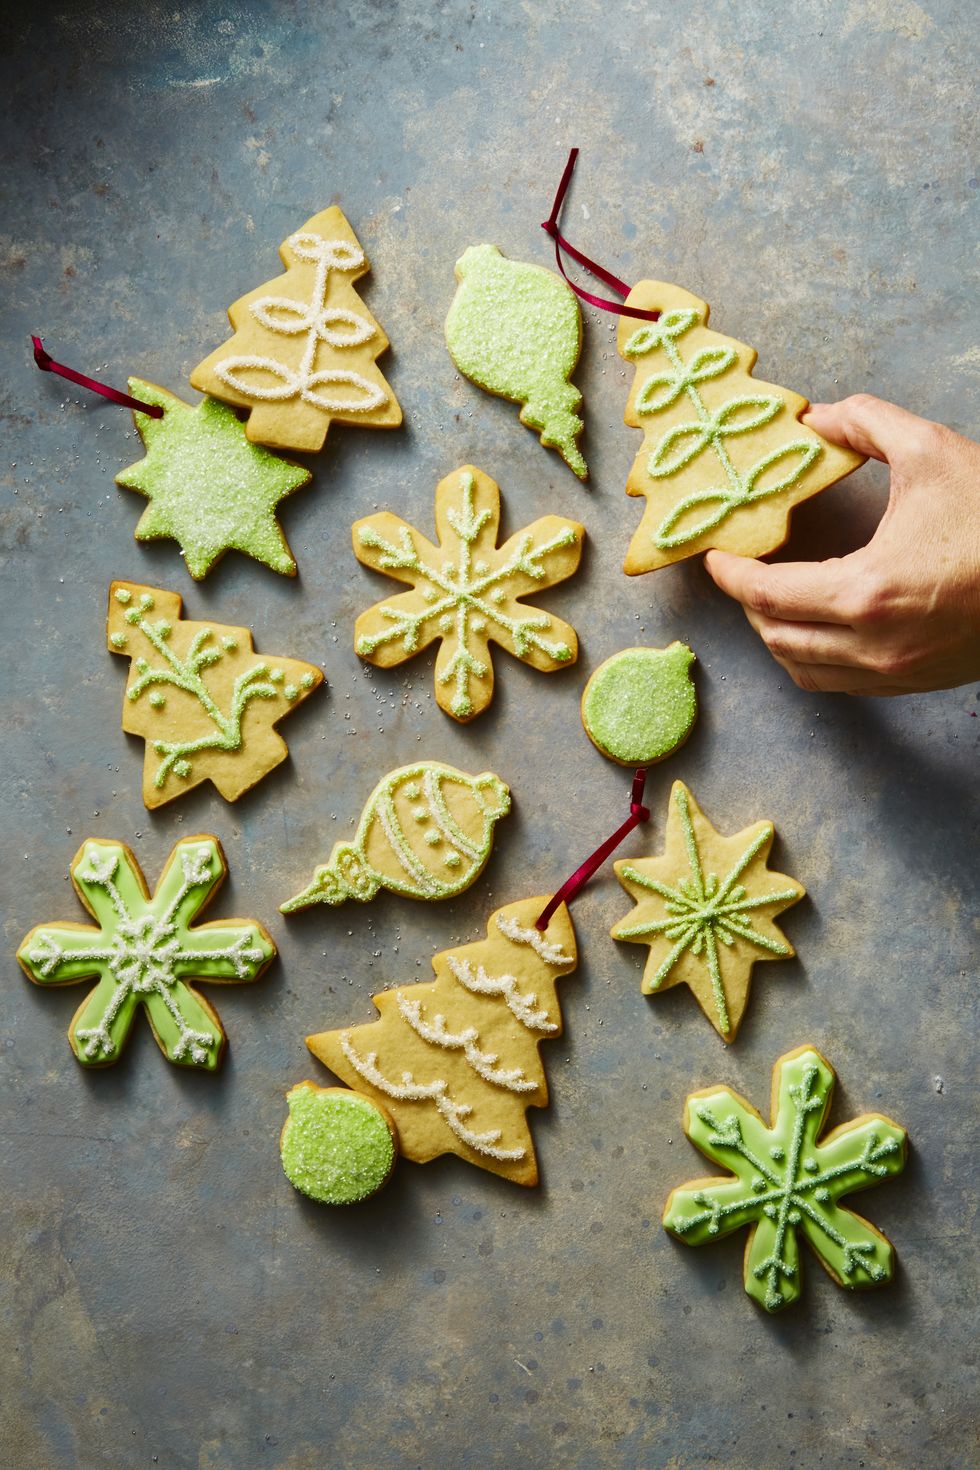 Image of Christmas biscuits which are being used as decorations